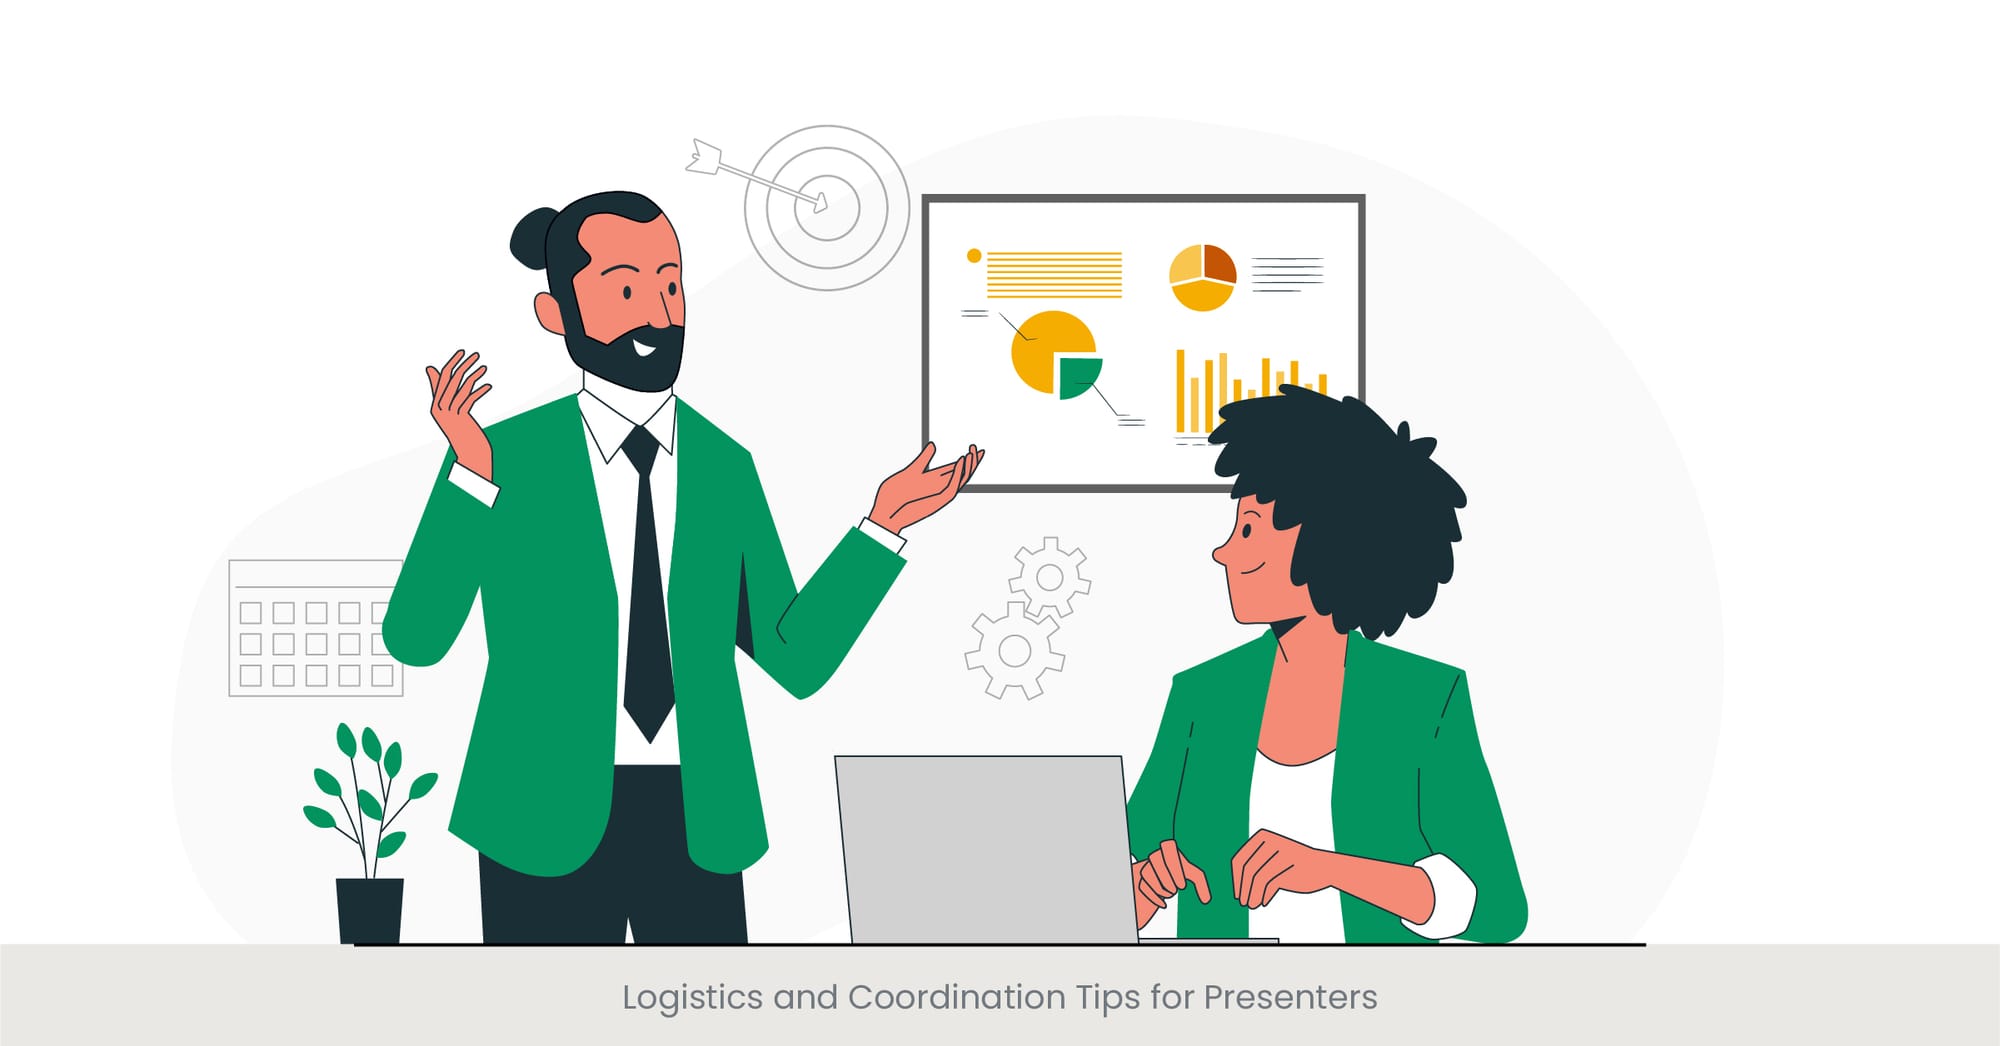 Logistics and Coordination Tips for Presenters